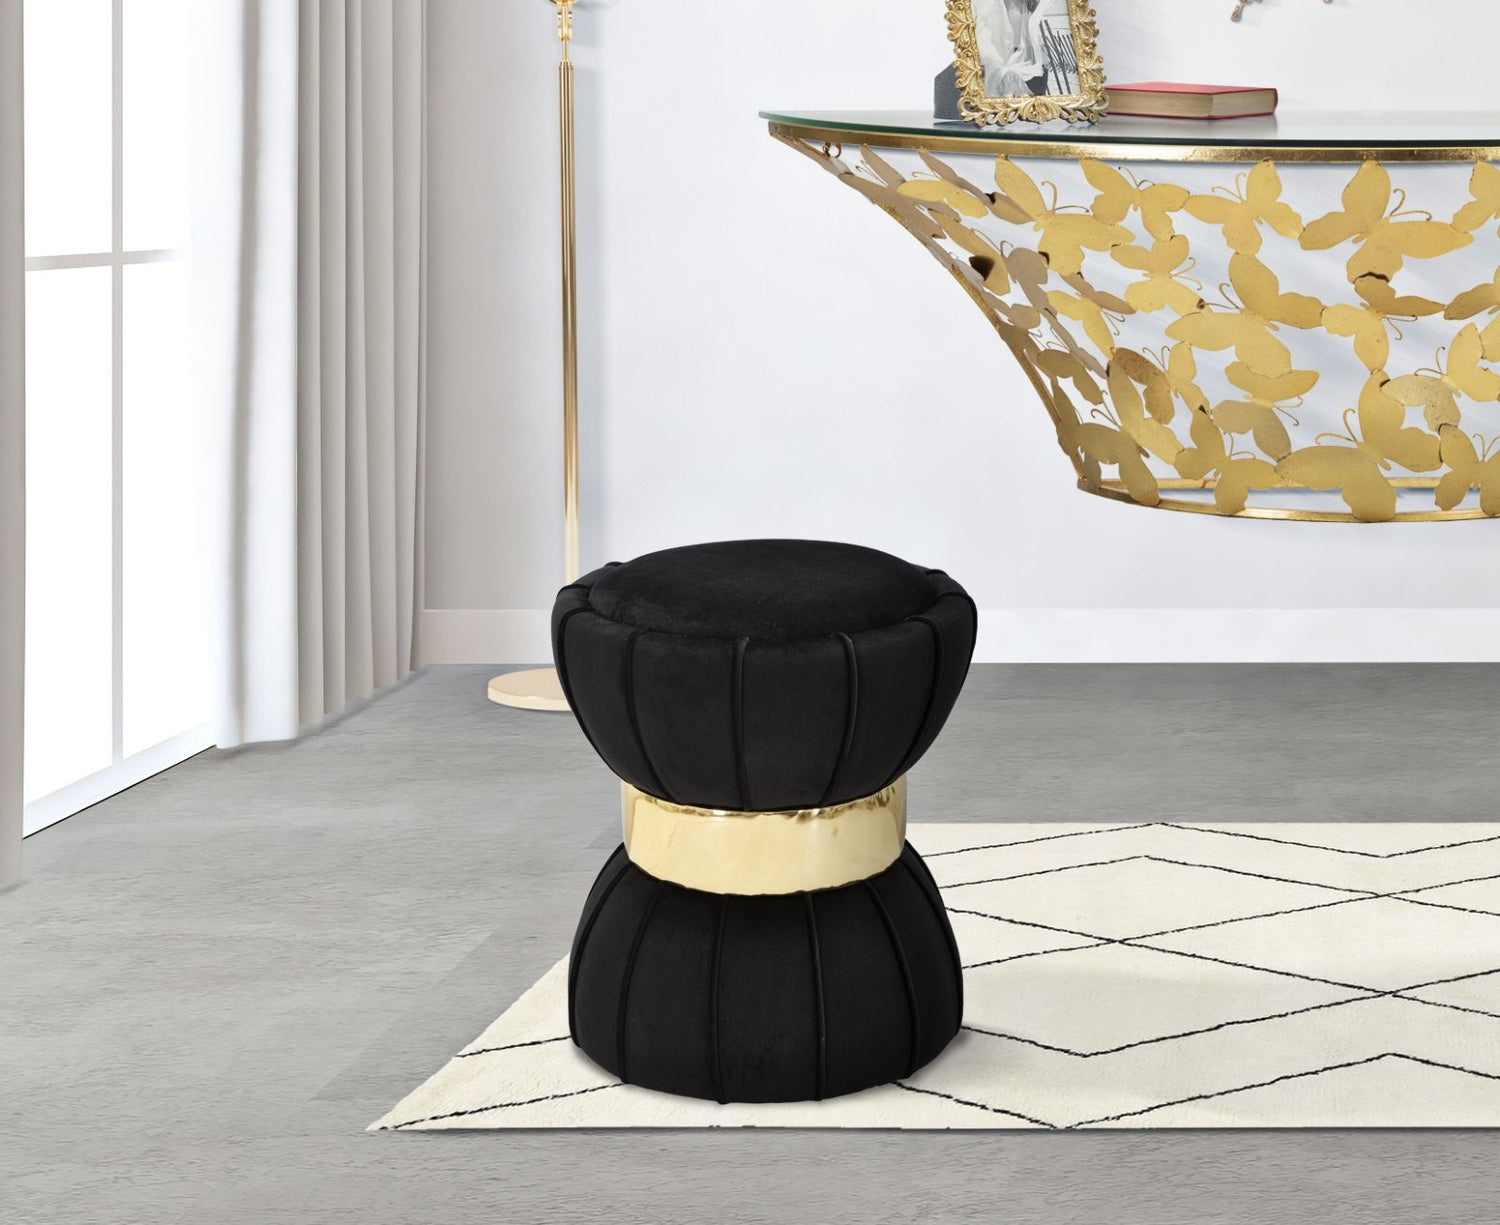 Buy Stool upholstered with Flower Velvet fabric Black / Gold, Ø40xH44 cm online, best price, free delivery